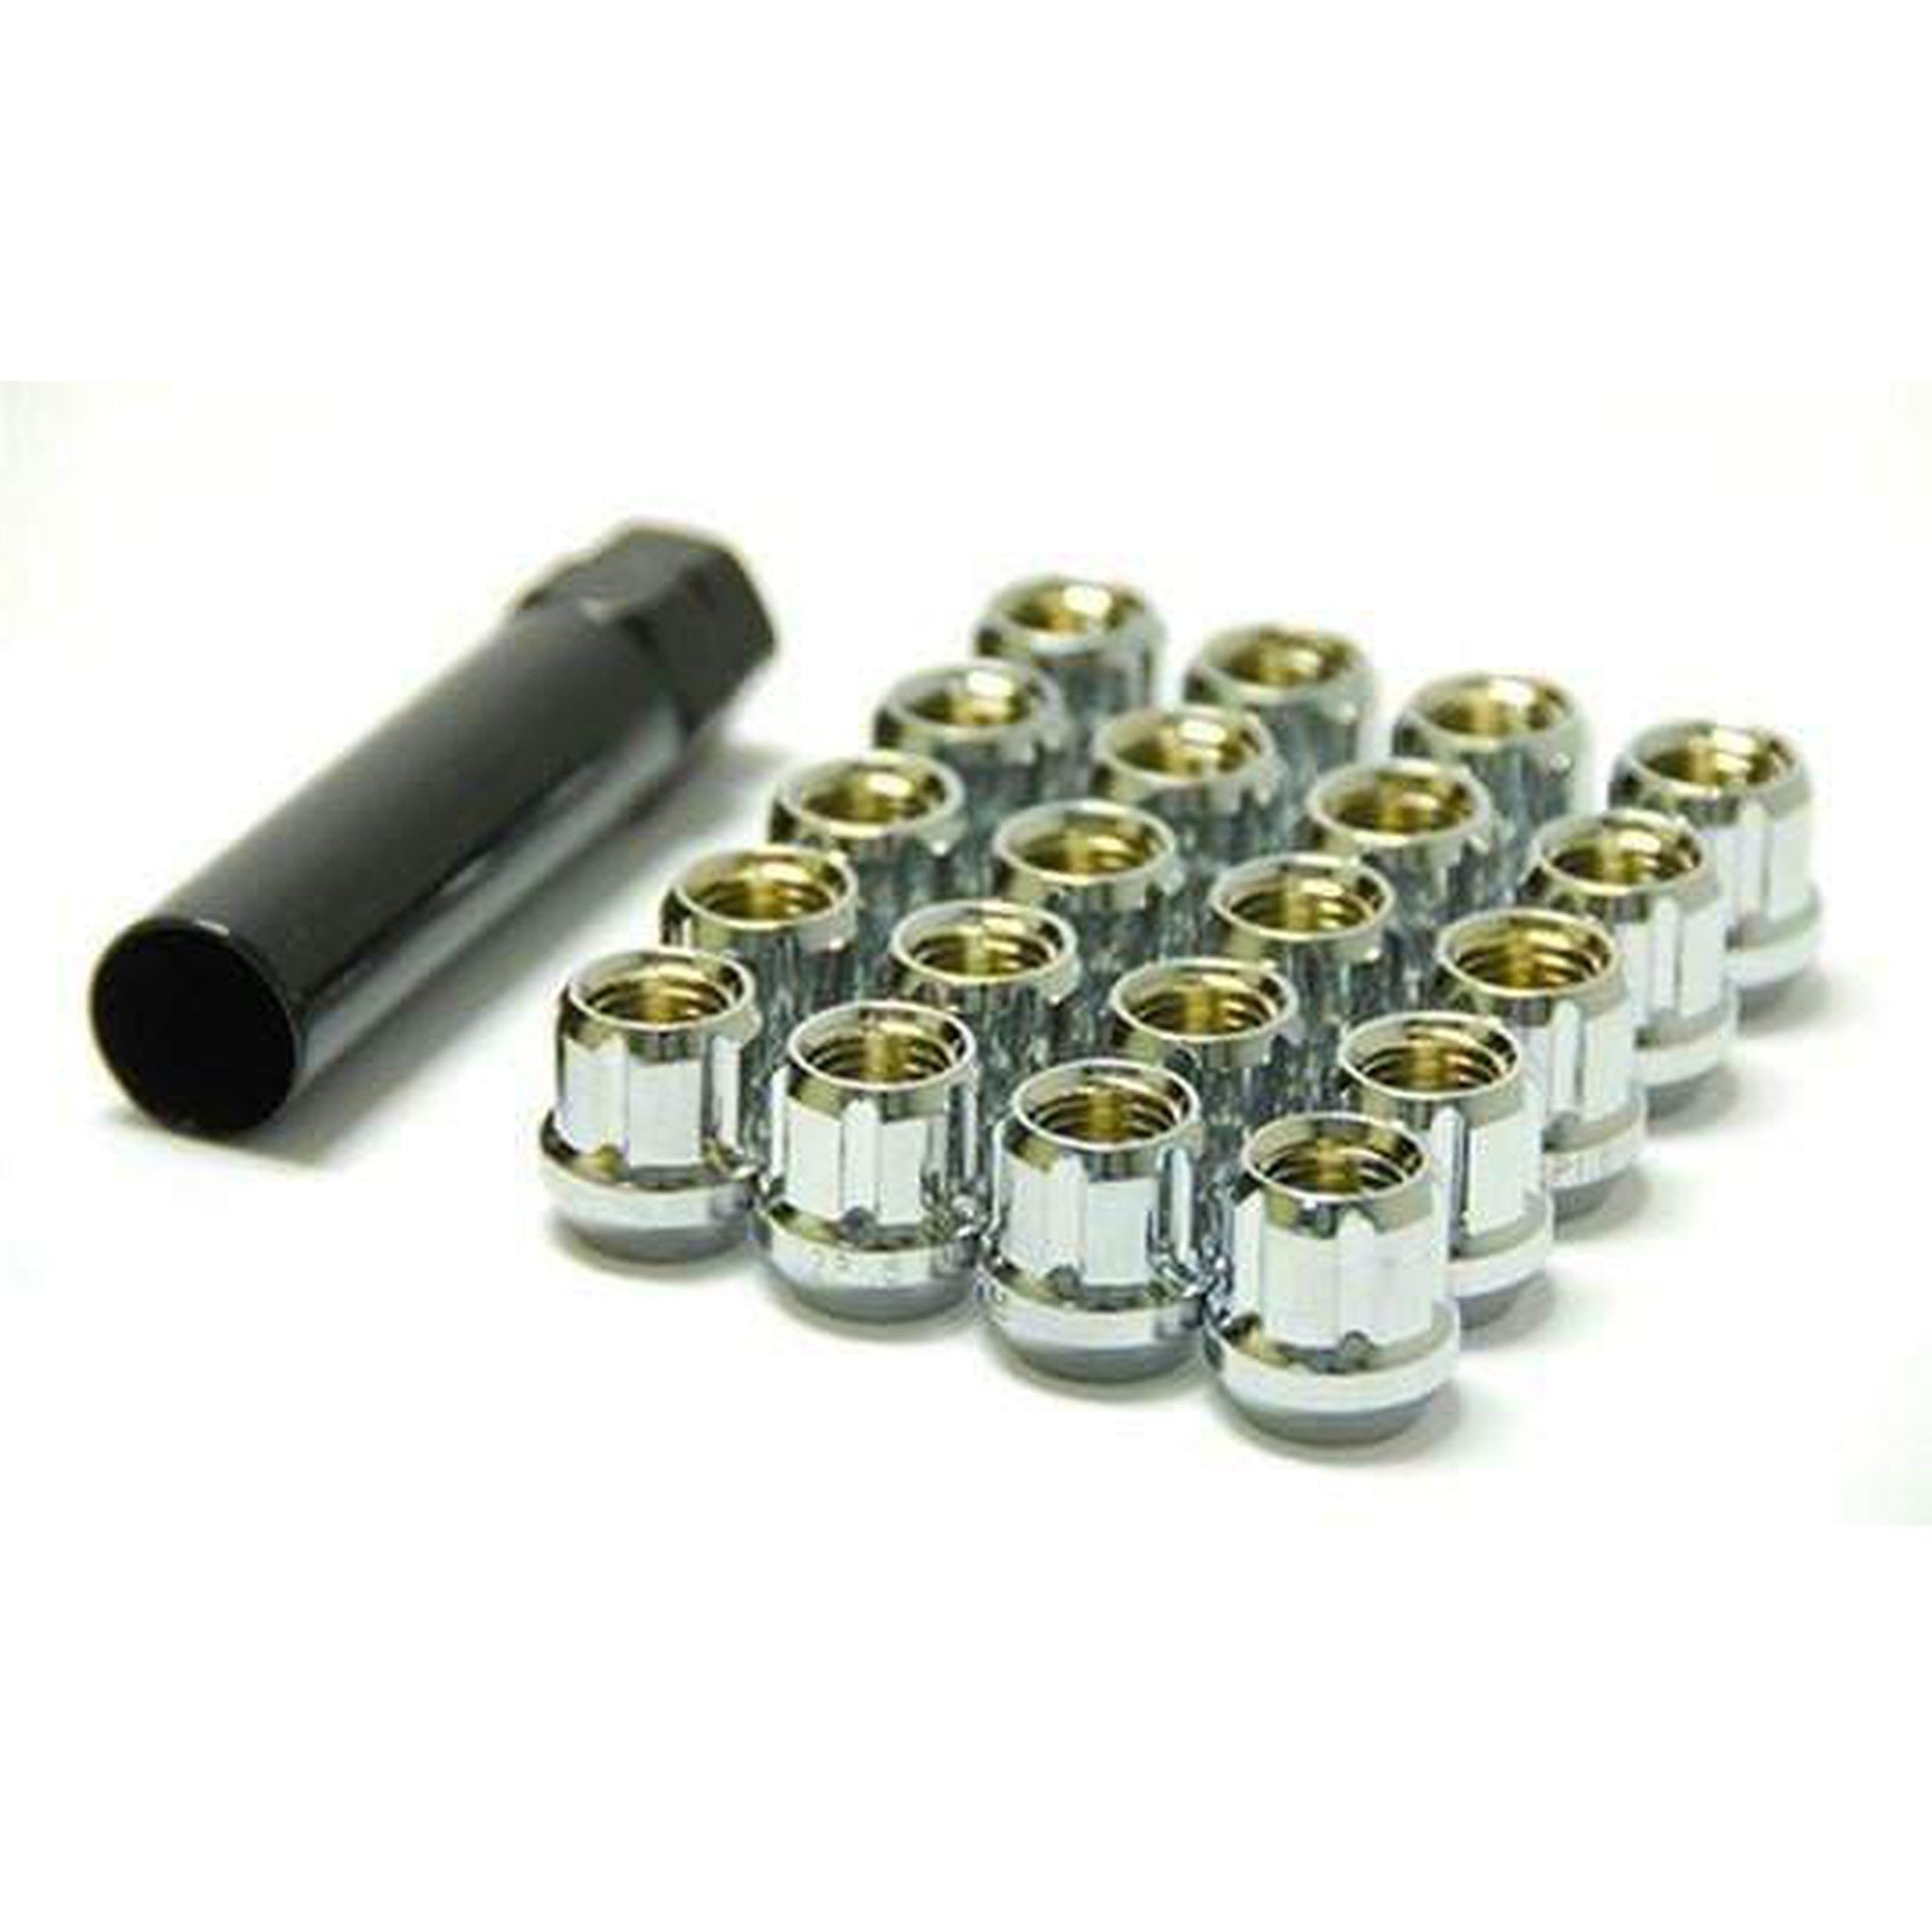 Muteki Super Tuner Open-Ended Lug Nuts 12x1.25mm - Chrome